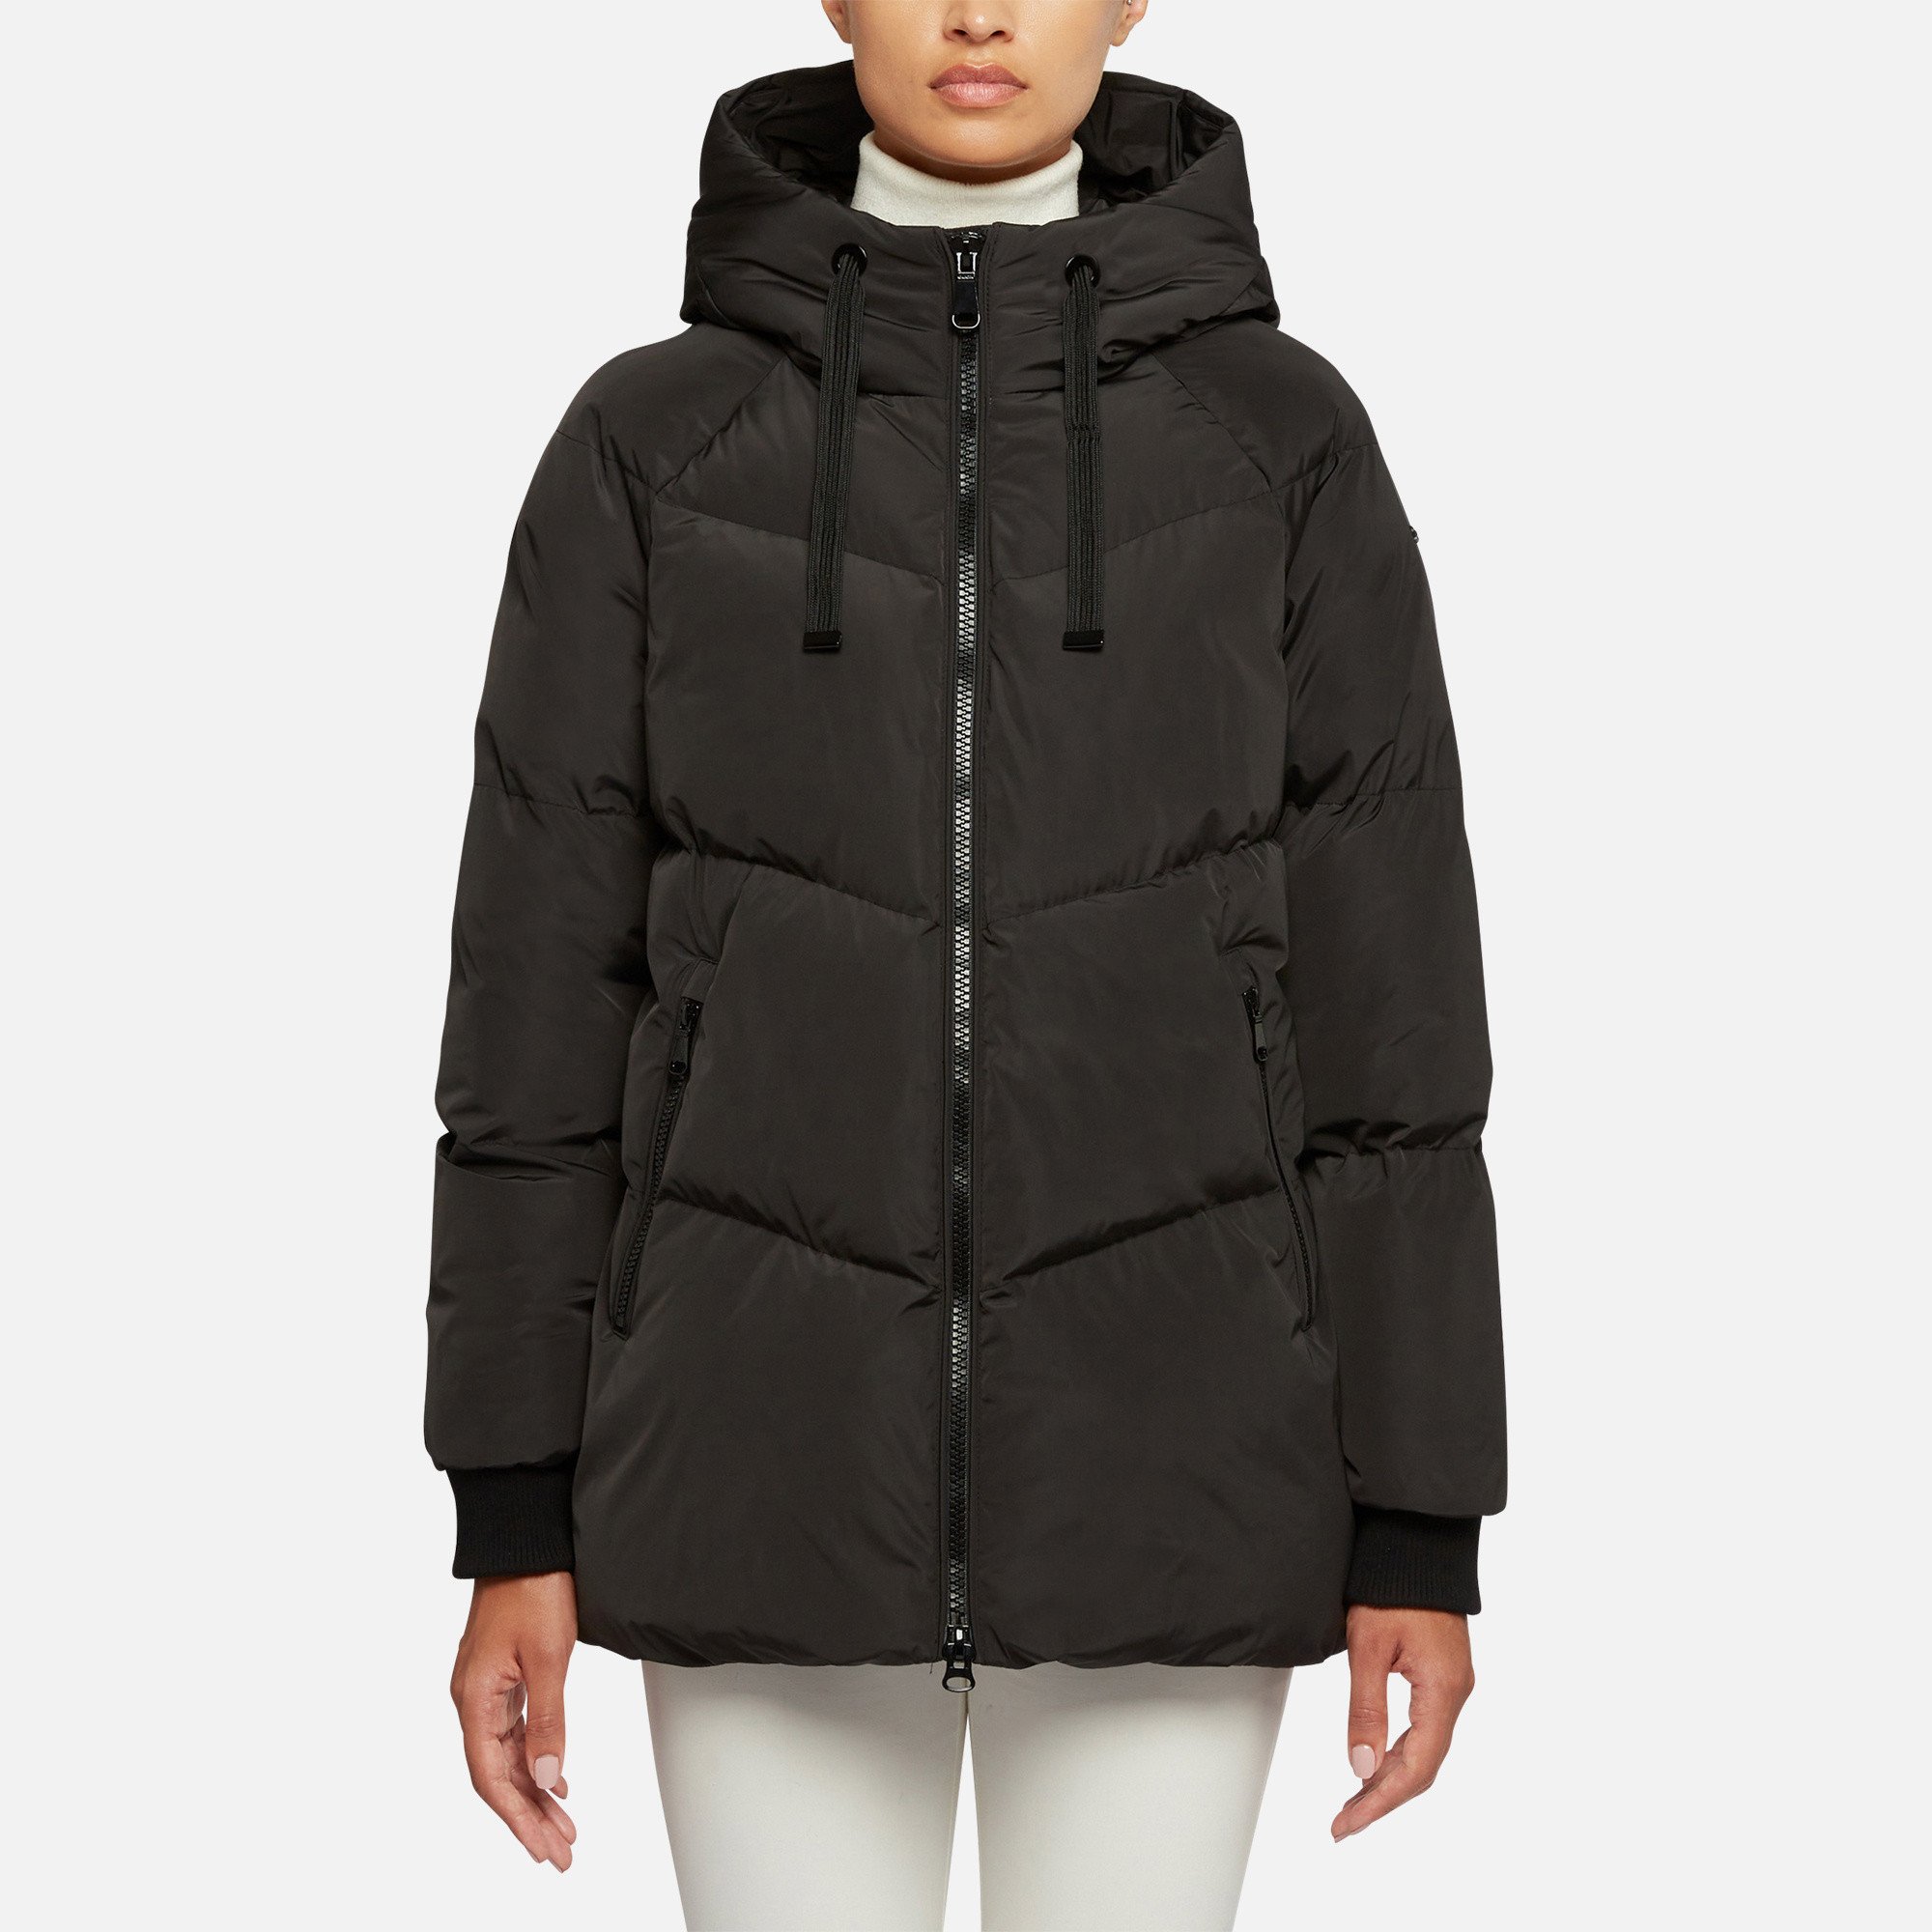 Women's long padded parka with an enveloping hood, ideal for use in cold temperatures.